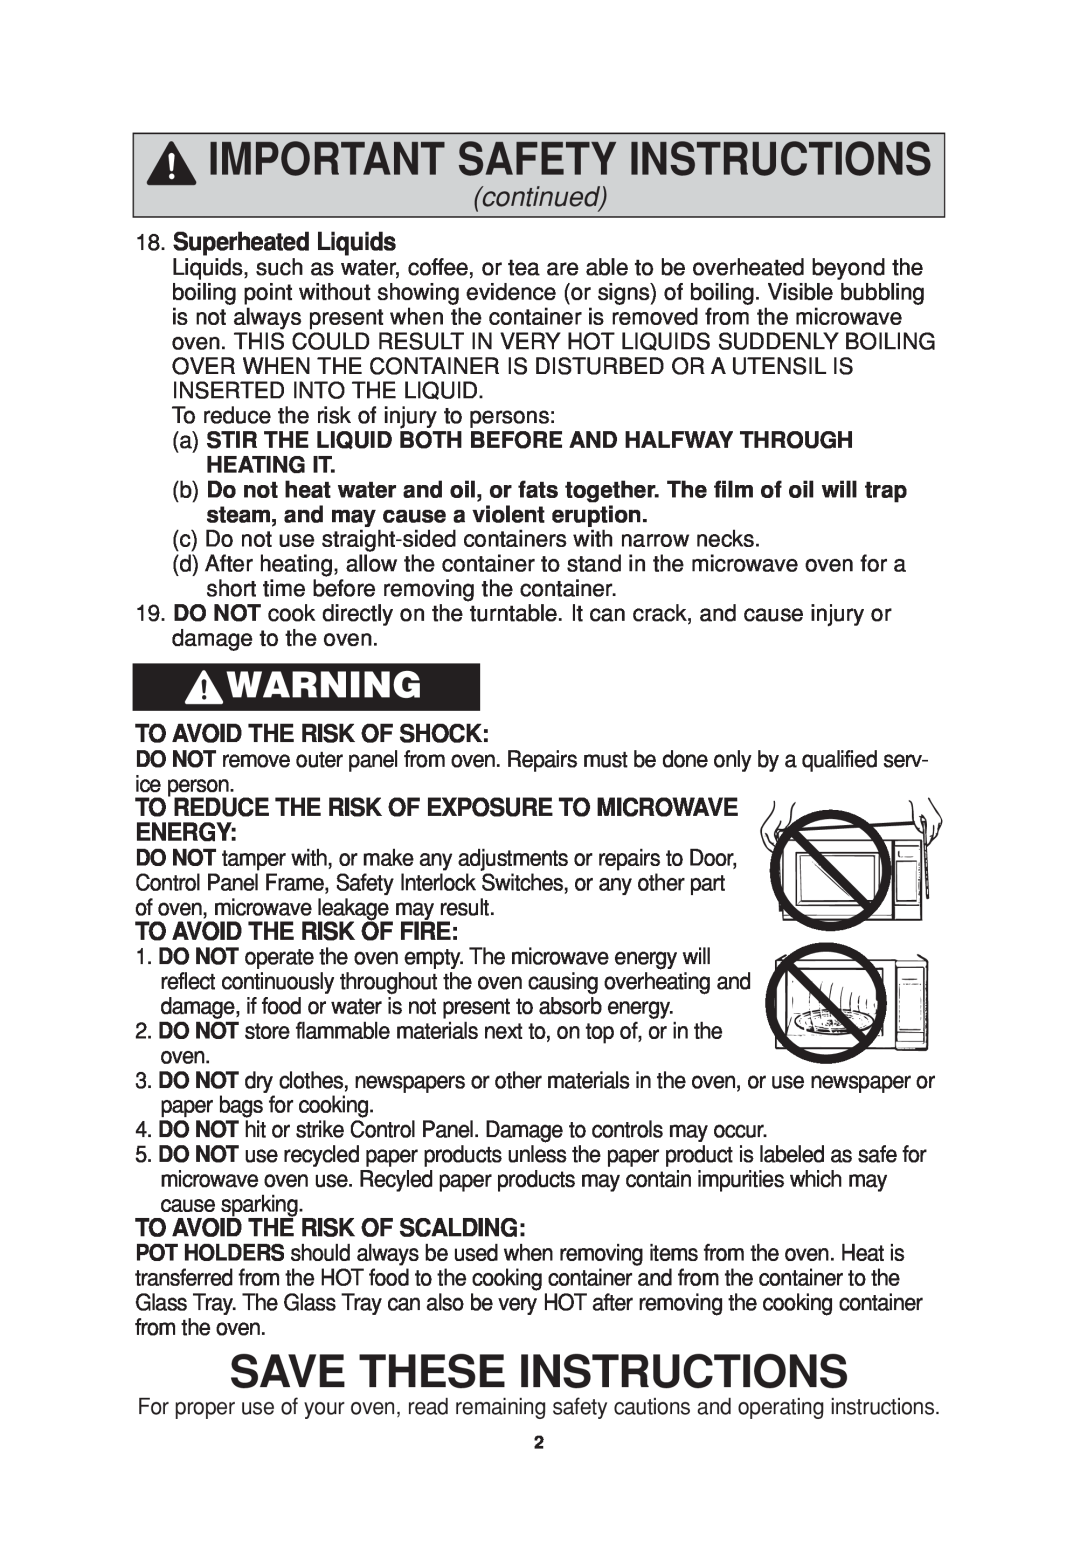 Panasonic NN-S935, NN-SA647 Save These Instructions, continued, Superheated Liquids, To Avoid The Risk Of Shock, Energy 